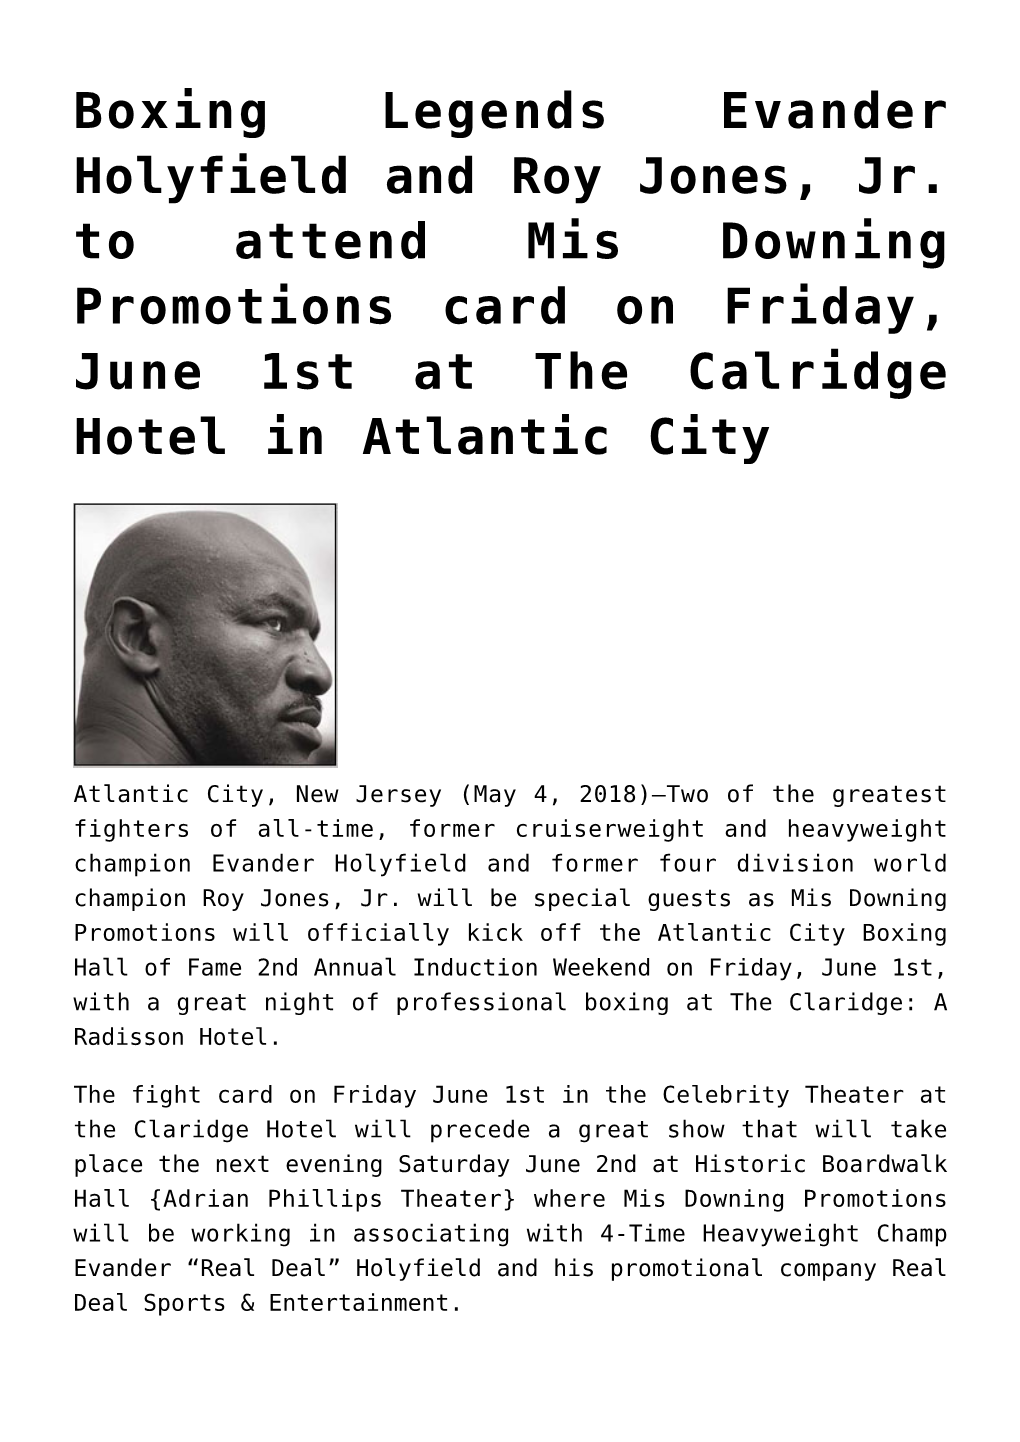 Boxing Legends Evander Holyfield and Roy Jones, Jr. to Attend Mis Downing Promotions Card on Friday, June 1St at the Calridge Hotel in Atlantic City